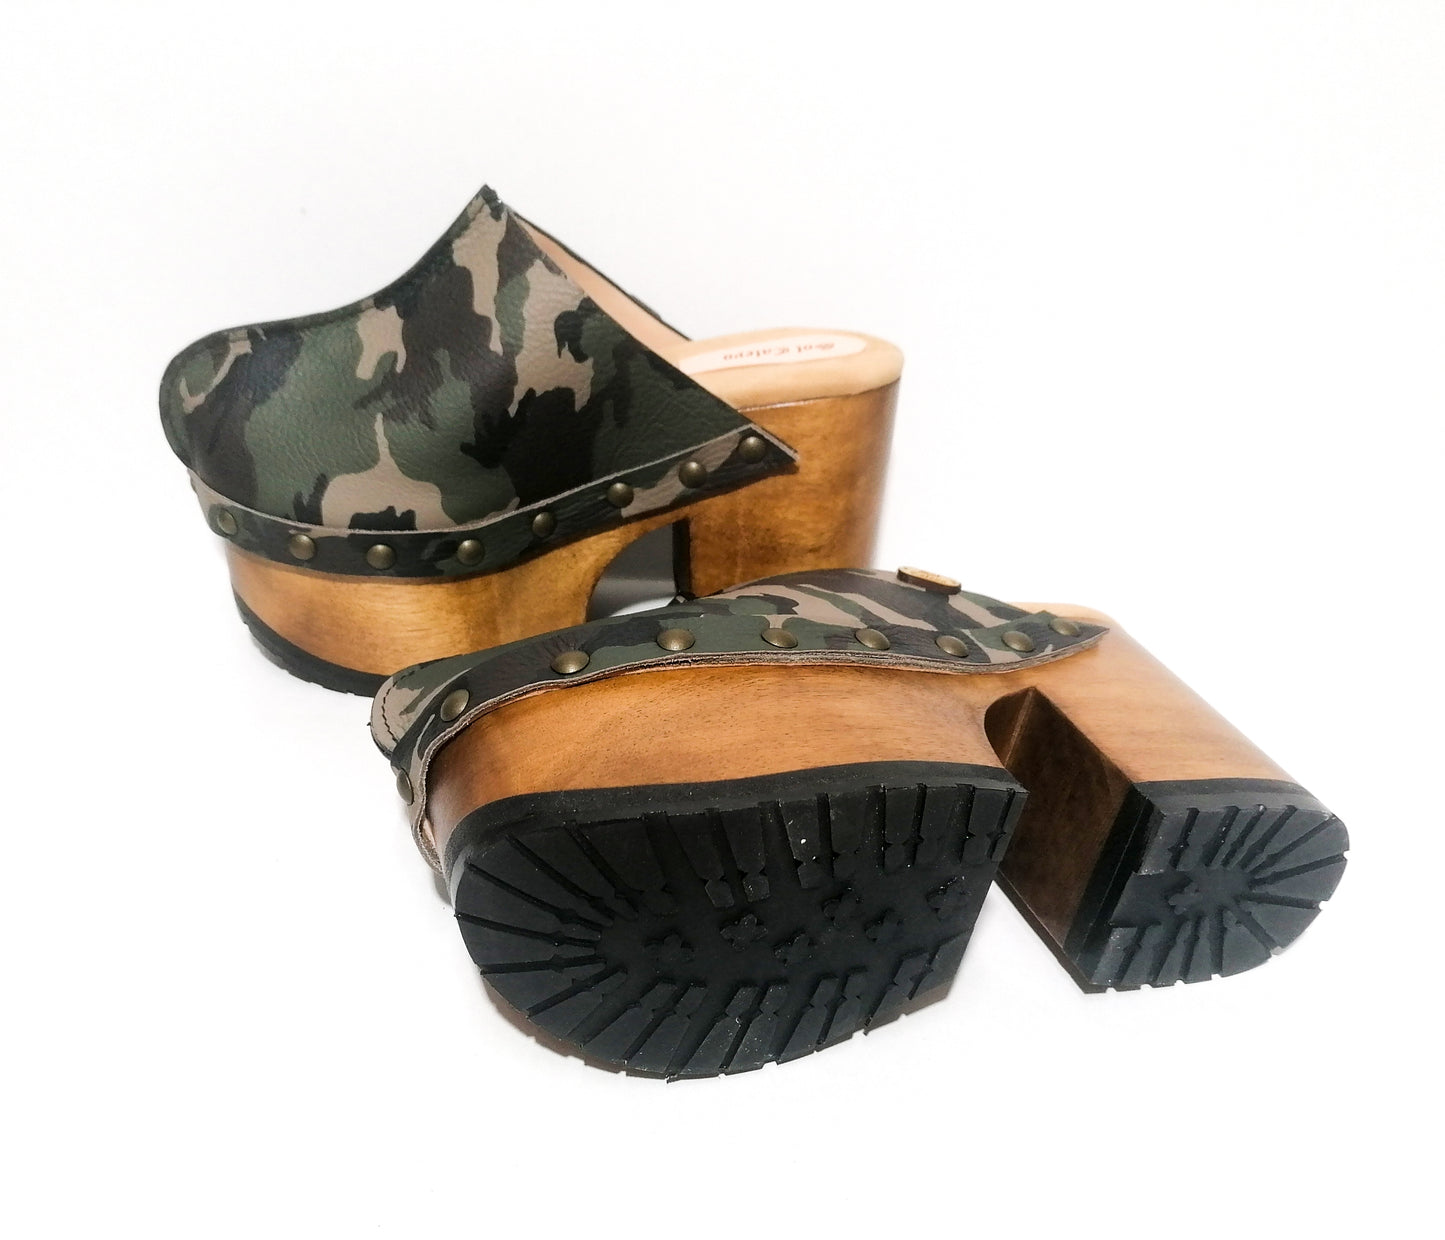 Military leather clogs. Leather clogs with wooden heel. Vintage style platform clogs. Sizes 34 to 47. Handmade leather shoes of excellent quality by Sol Caleyo. 